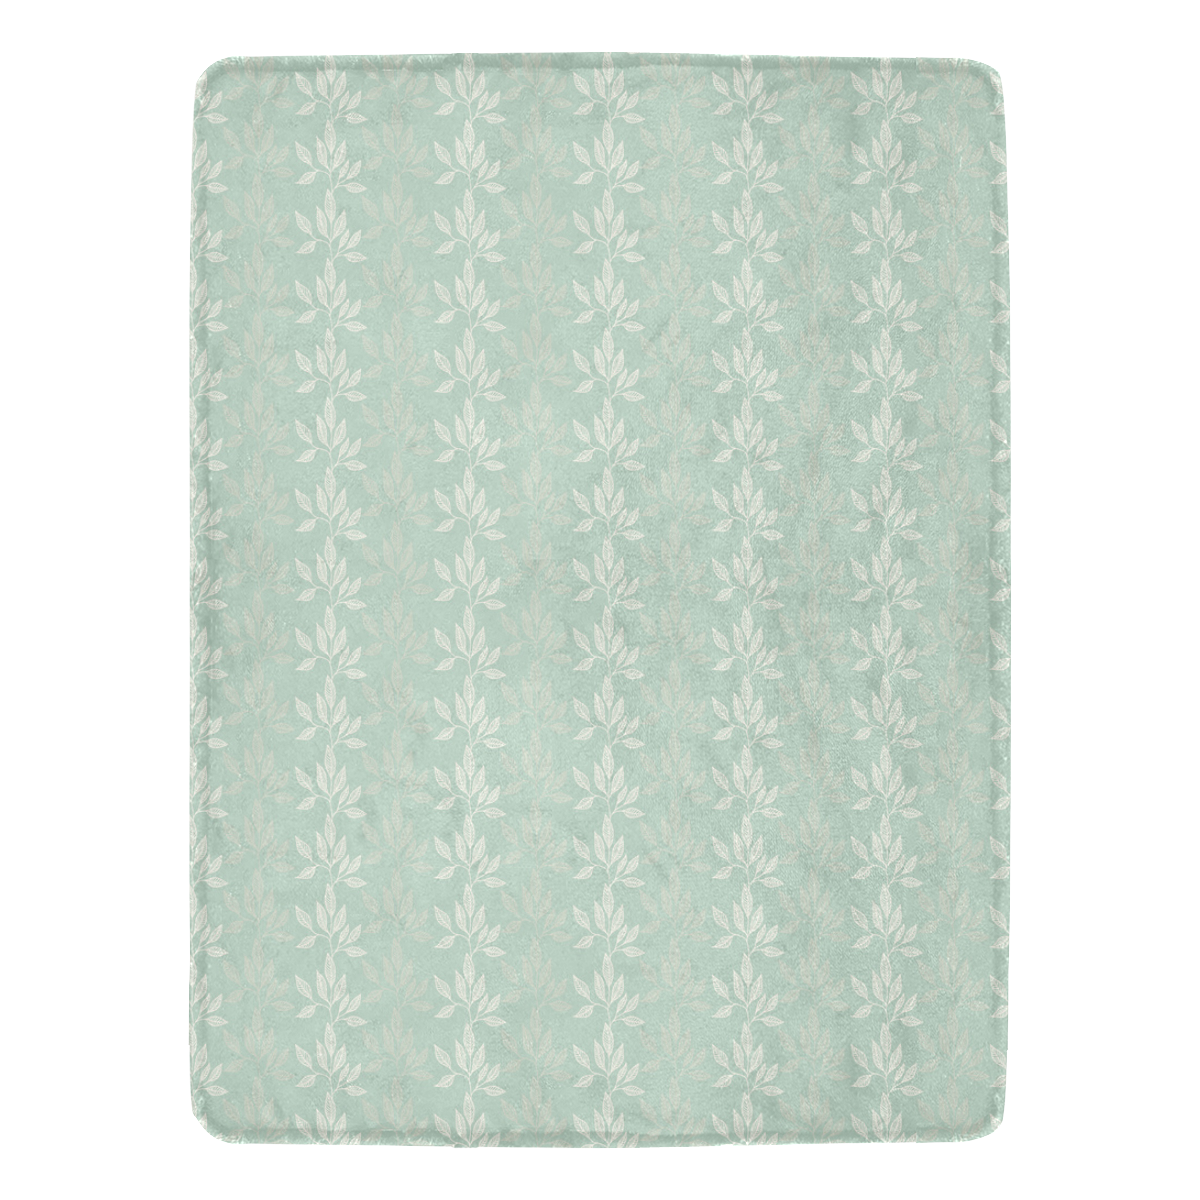 Floral pattern in Sage Green and white Ultra-Soft Micro Fleece Blanket 60"x80"